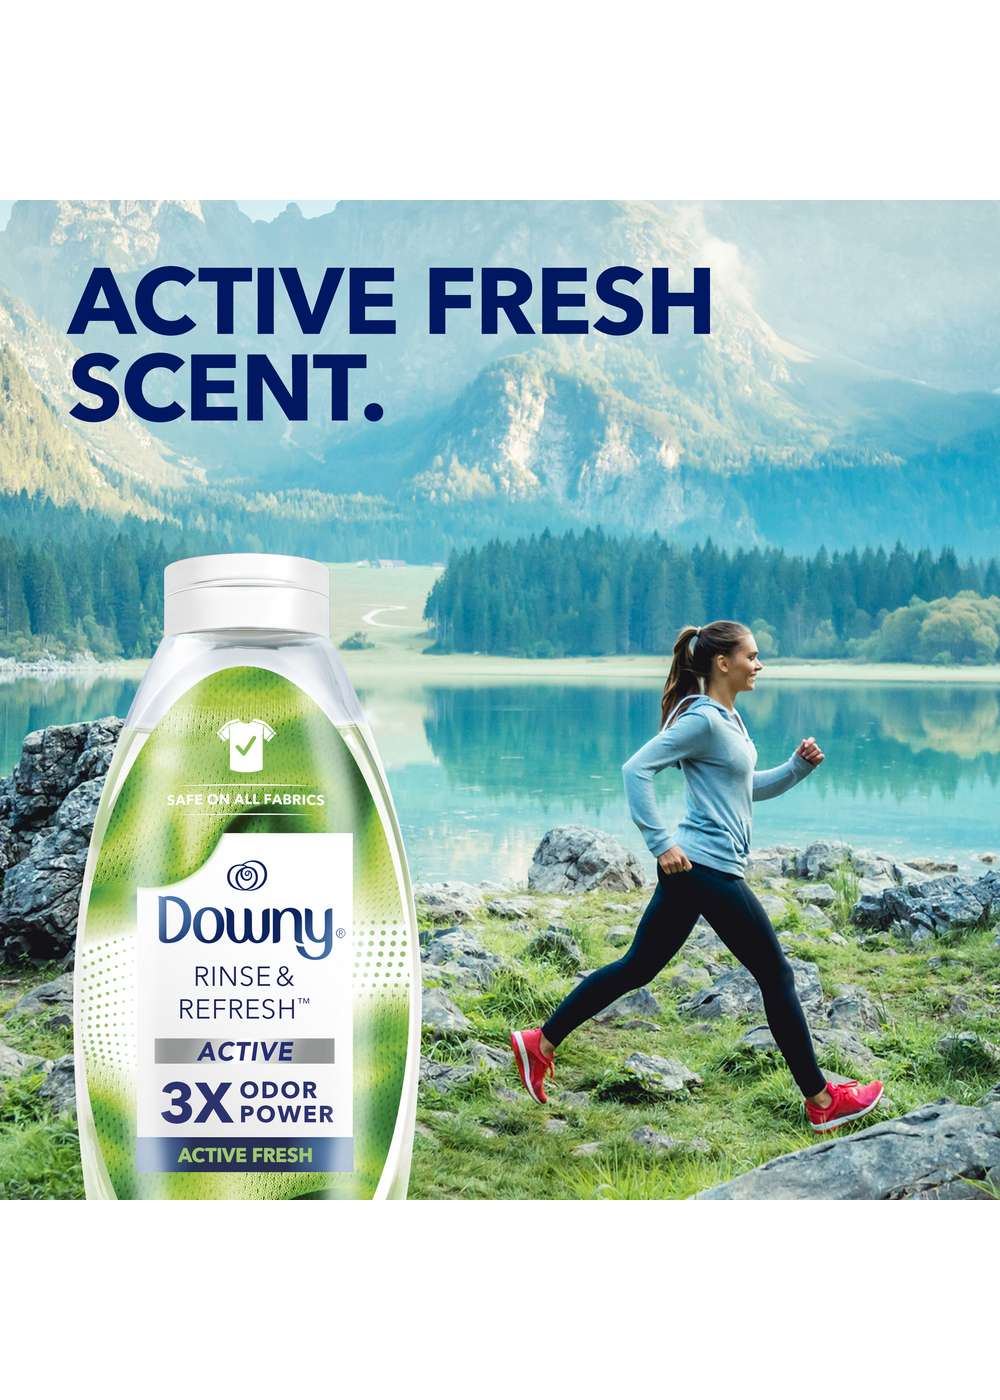 Downy Rinse & Refresh Laundry Odor Remover, 70 Loads - Active Fresh; image 9 of 11